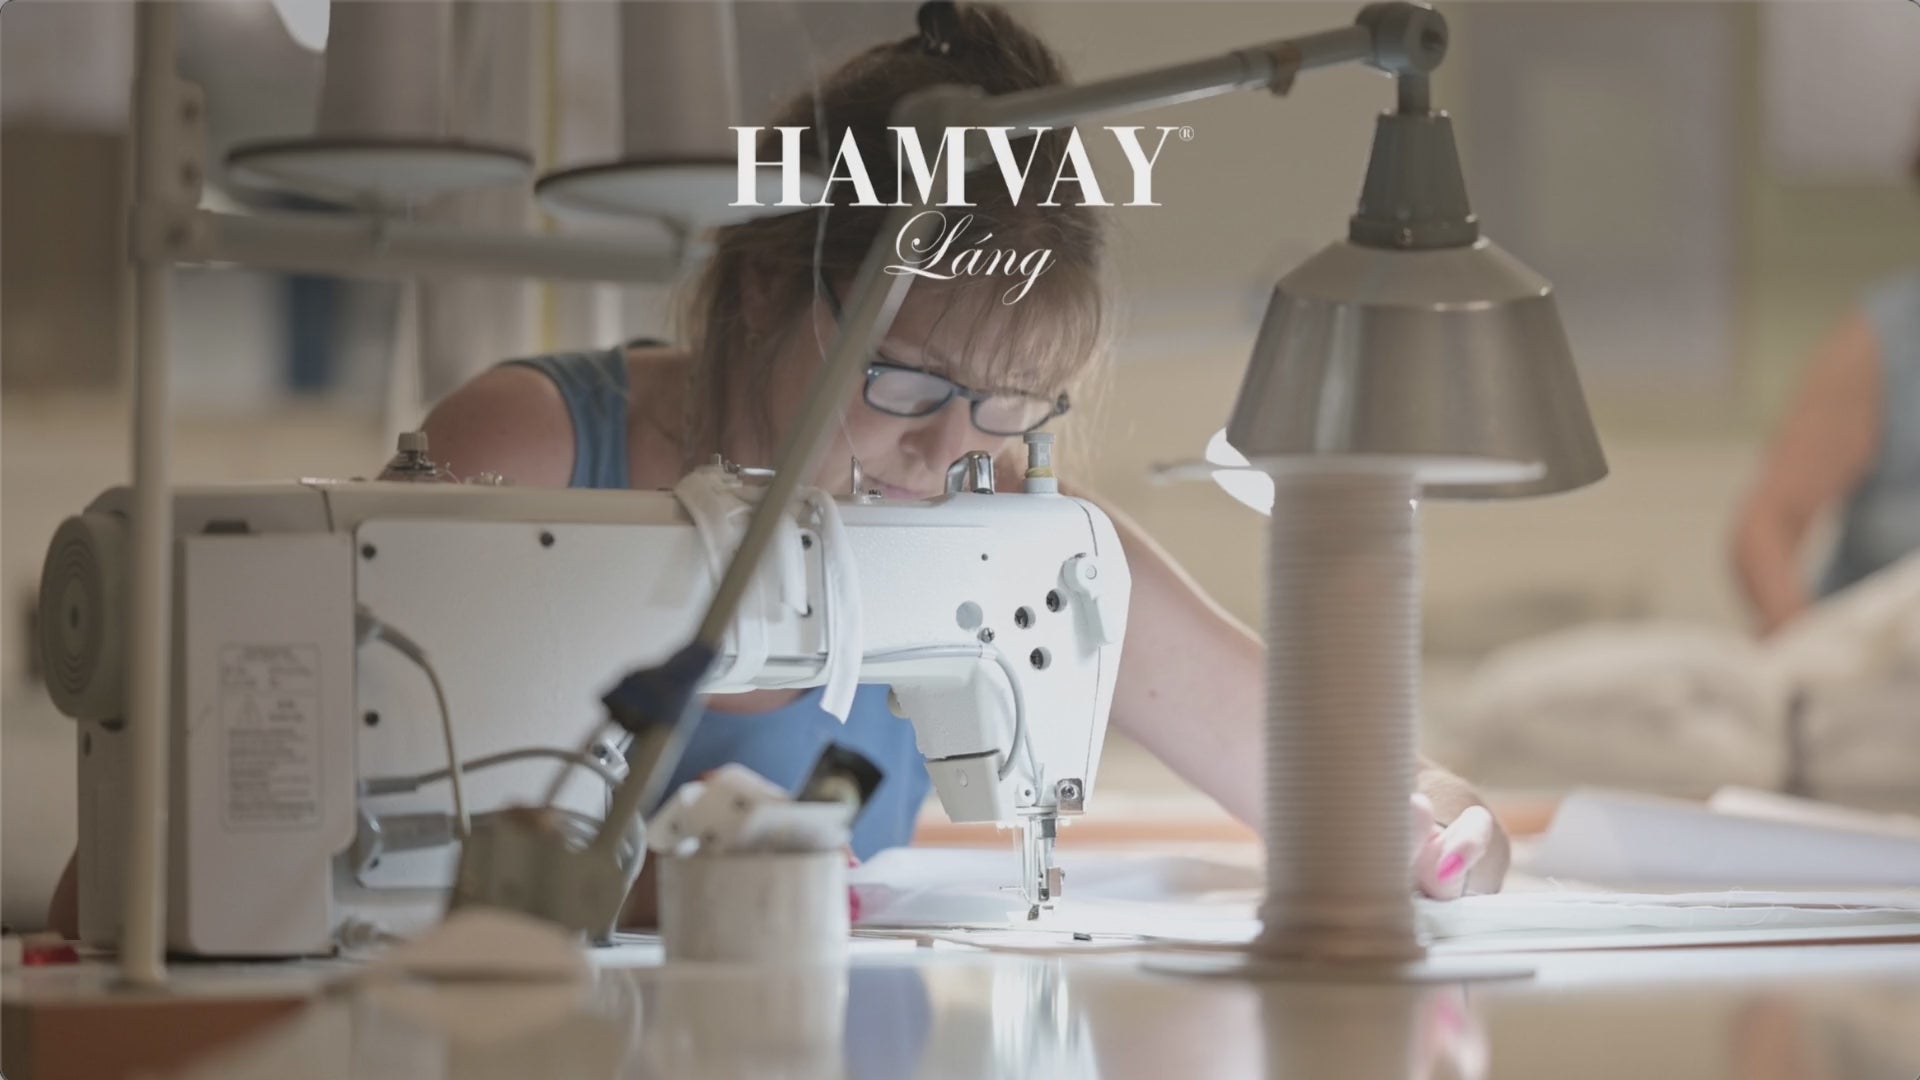 Load video: production of hamvay-láng down bedding